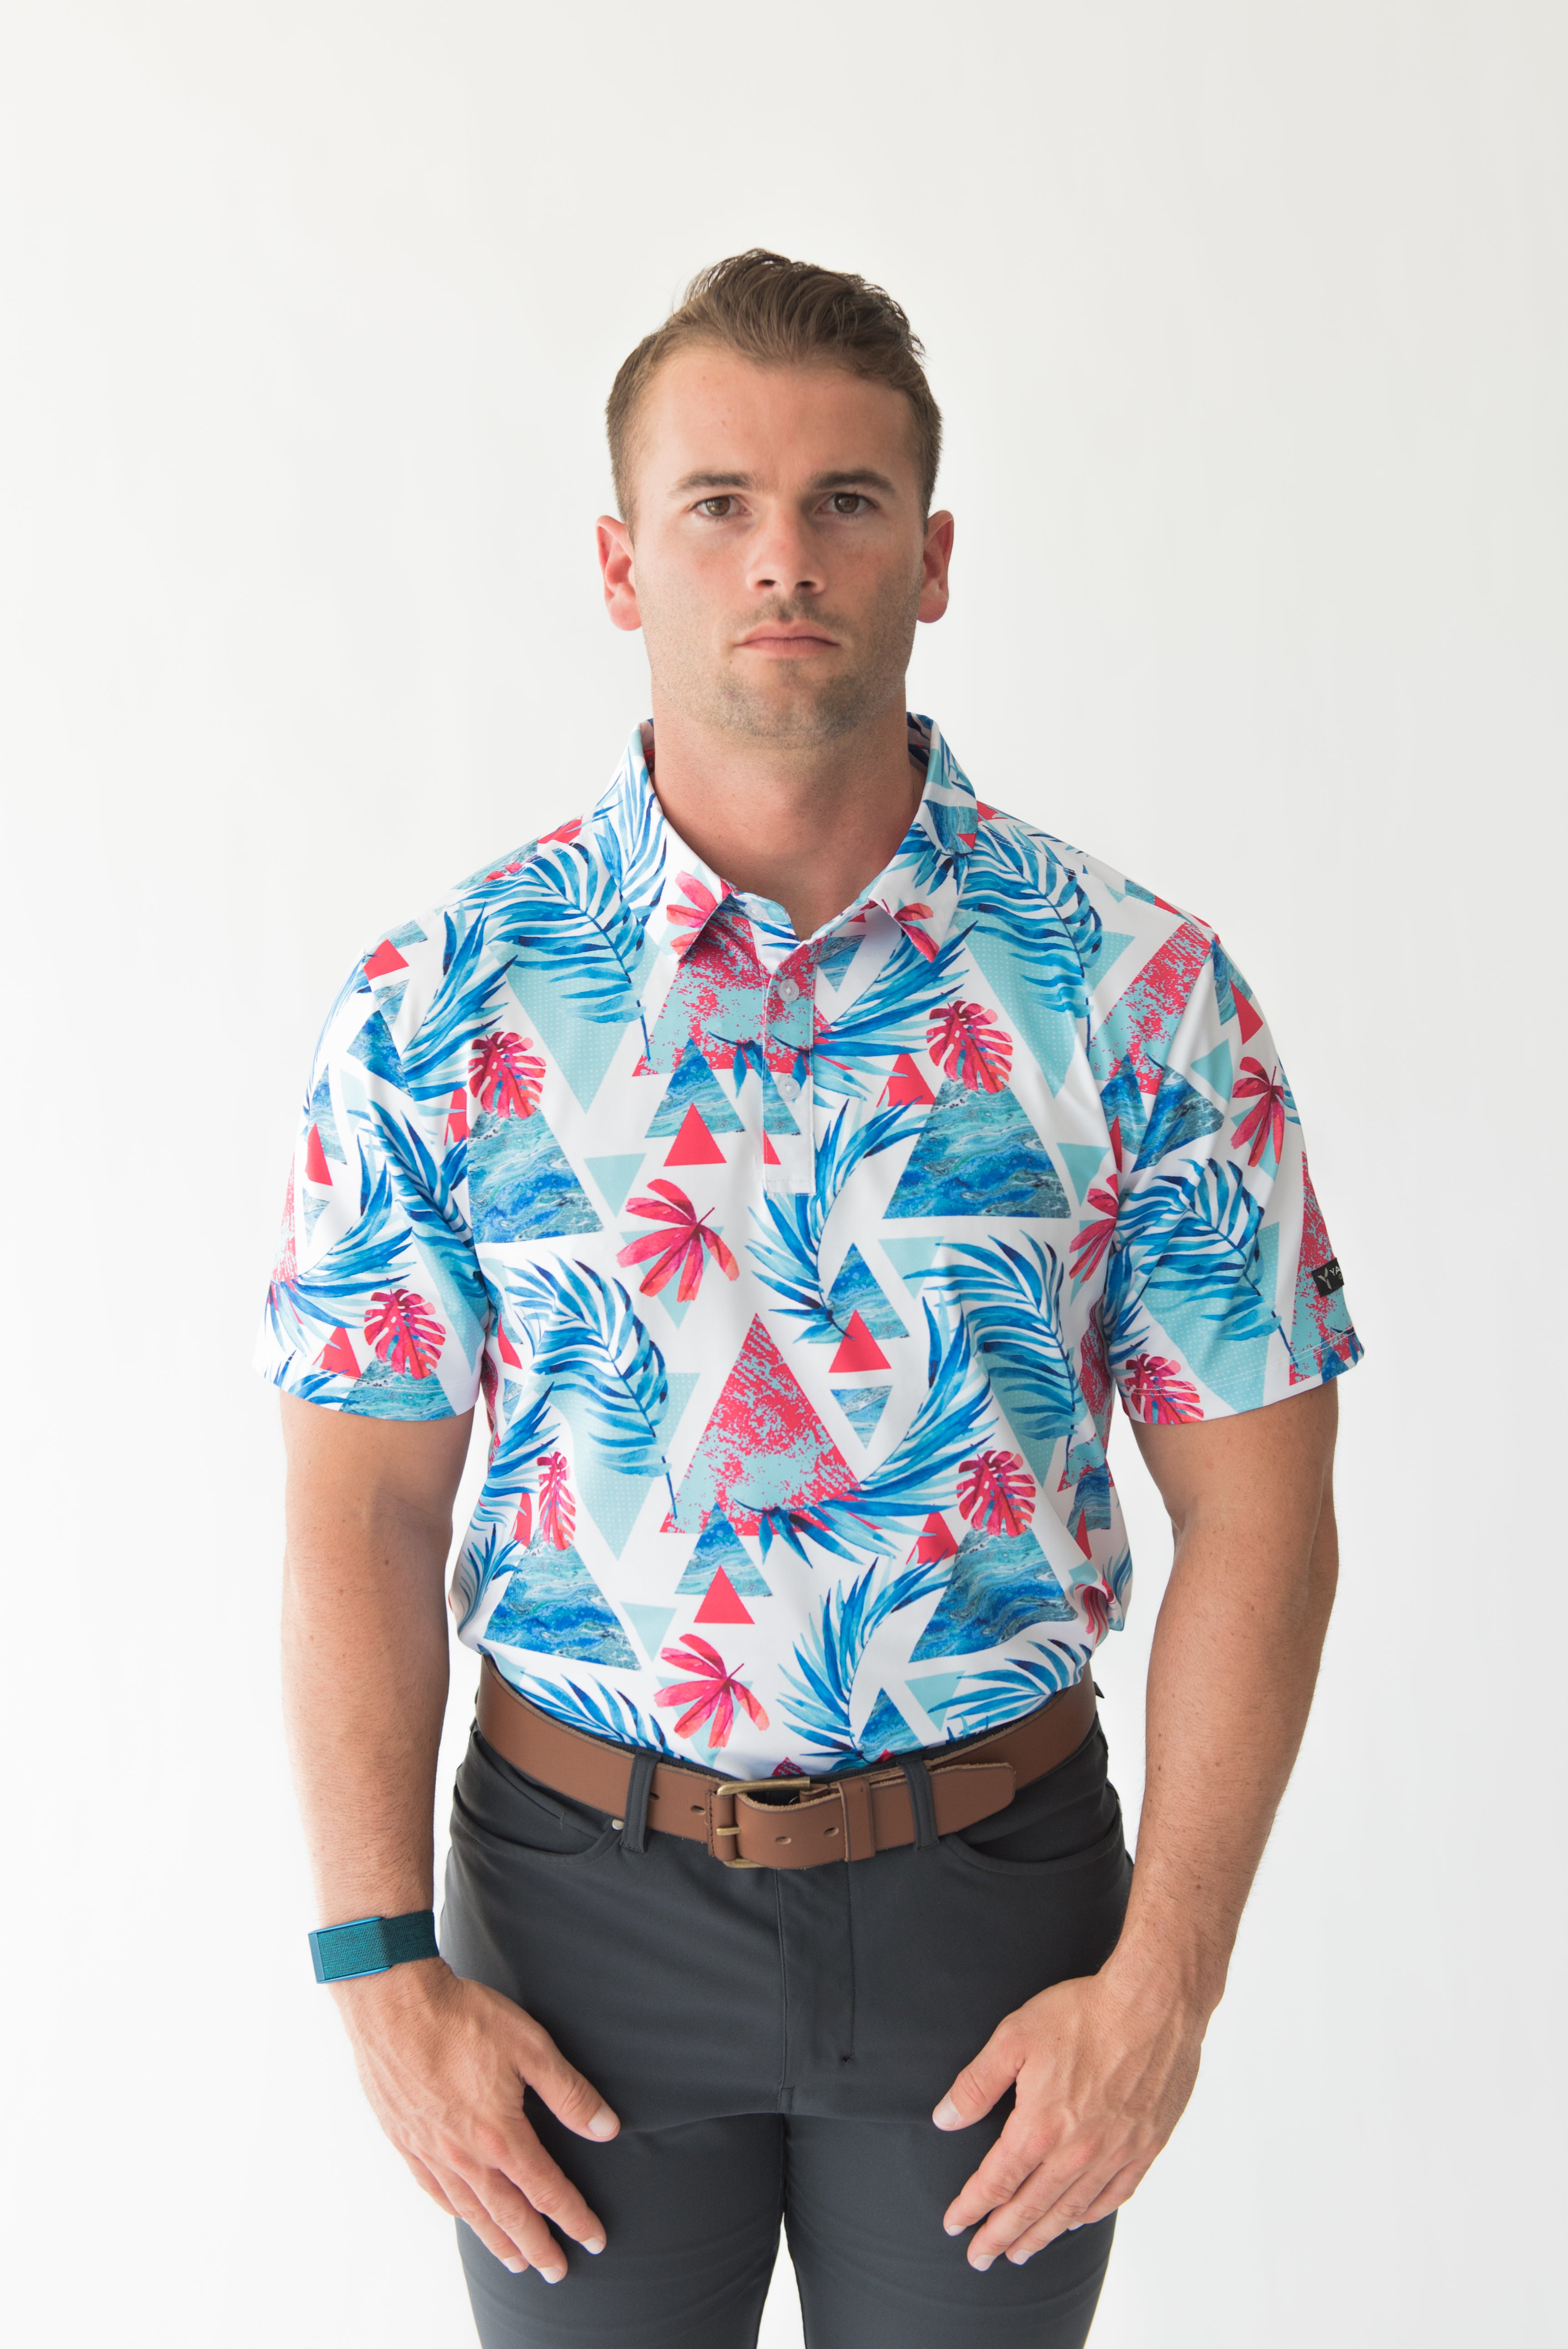 The Best Yatta Golf Polo Shirts For Men